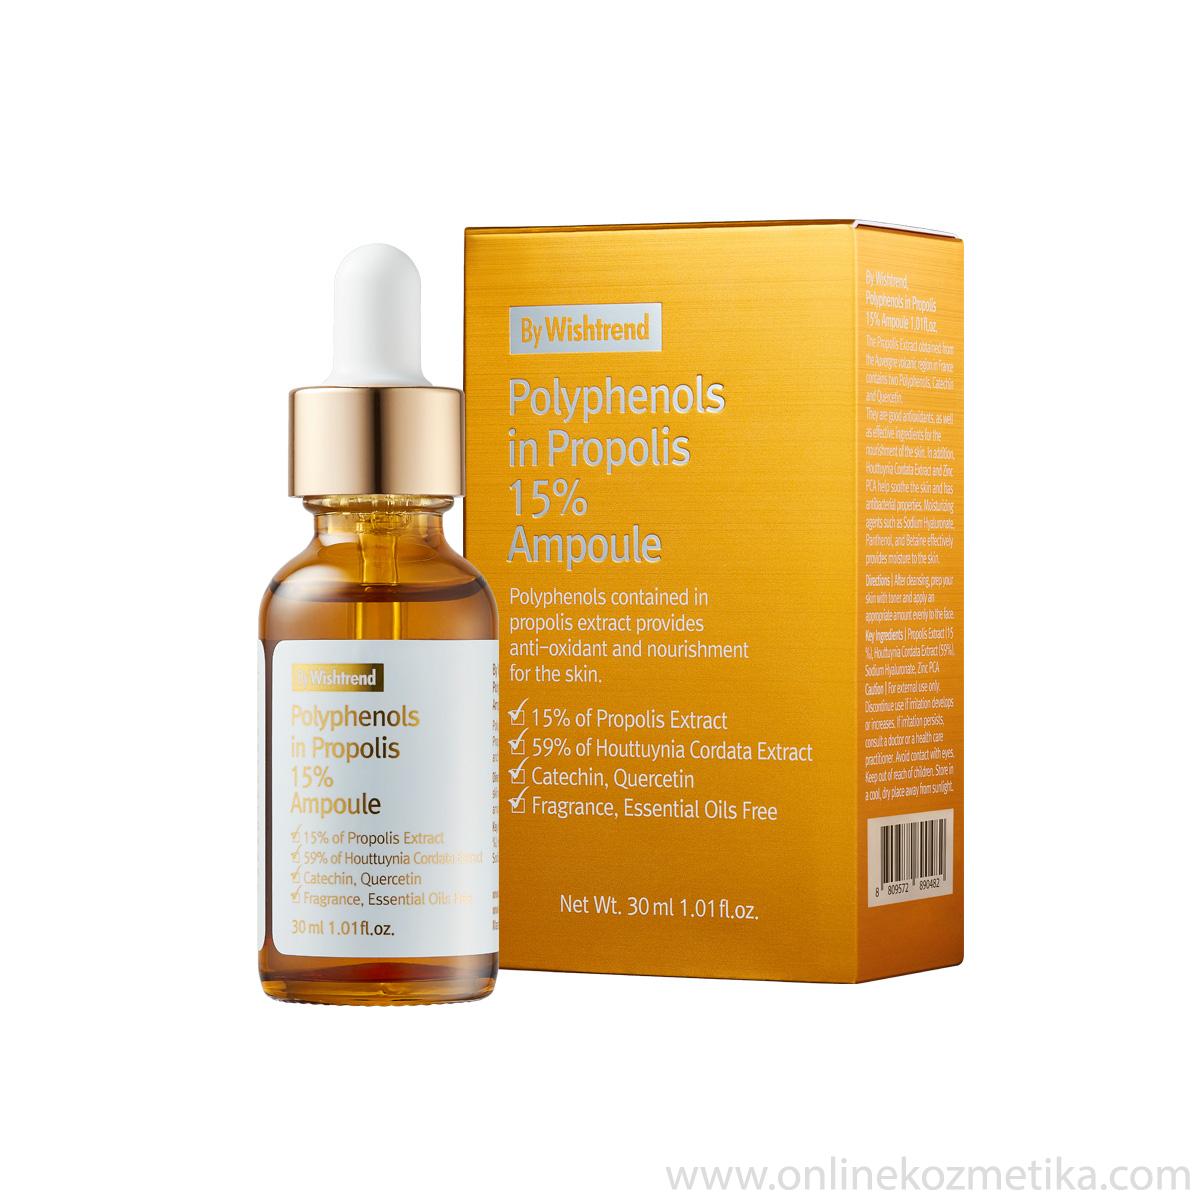 BY WISHTREND Polyphenols in propolis Ampoule 30ml 